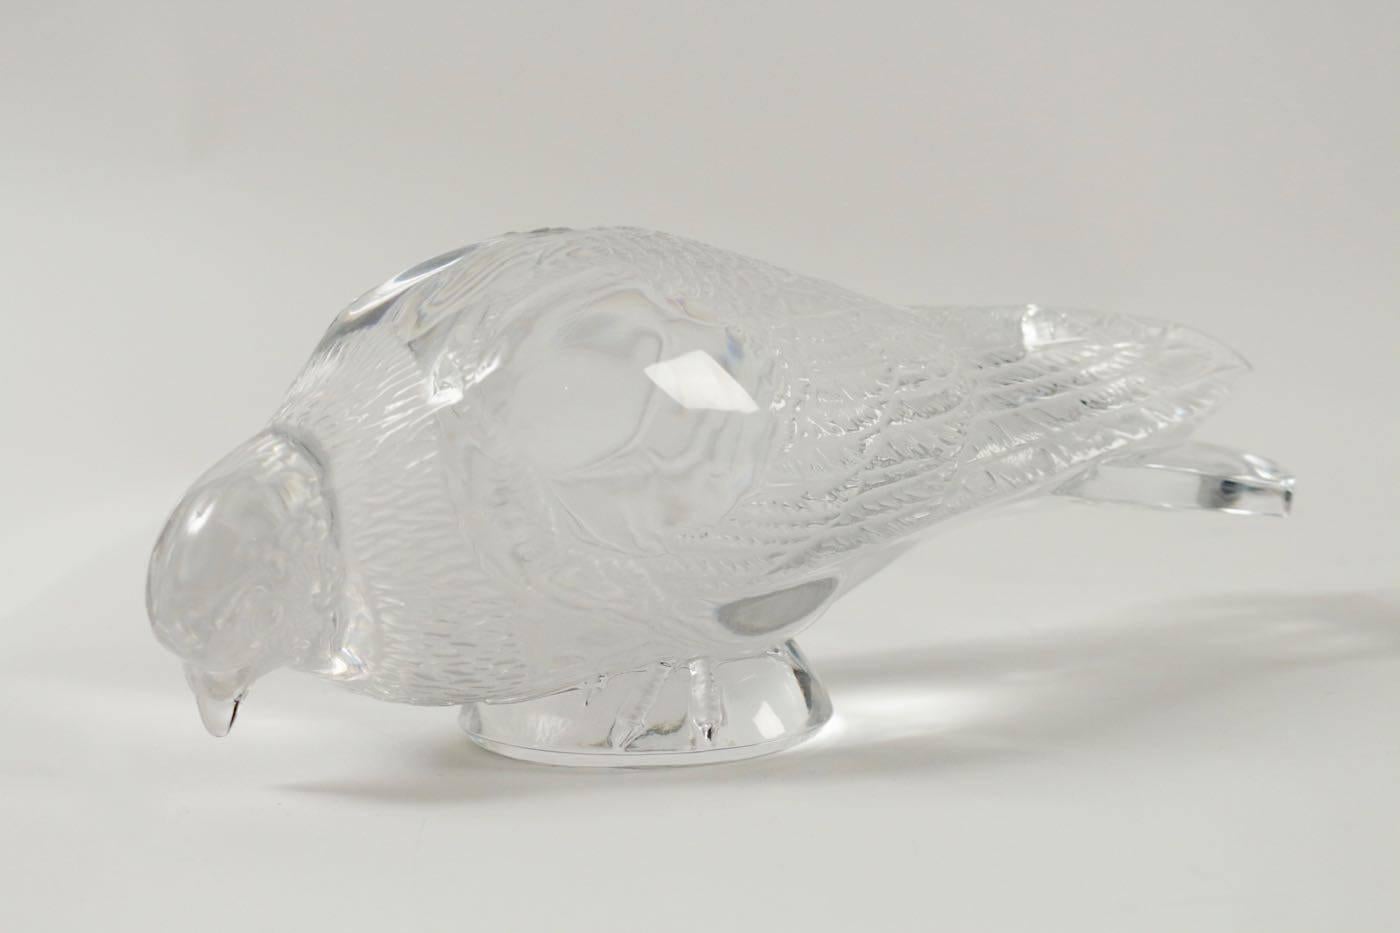 Lalique pigeon vervier decorative motif
clear and frosted crystal depiction of a pigeon with its beak down and body parallel to the ground
model 1206 created in 1932,
circa 1960 signed.